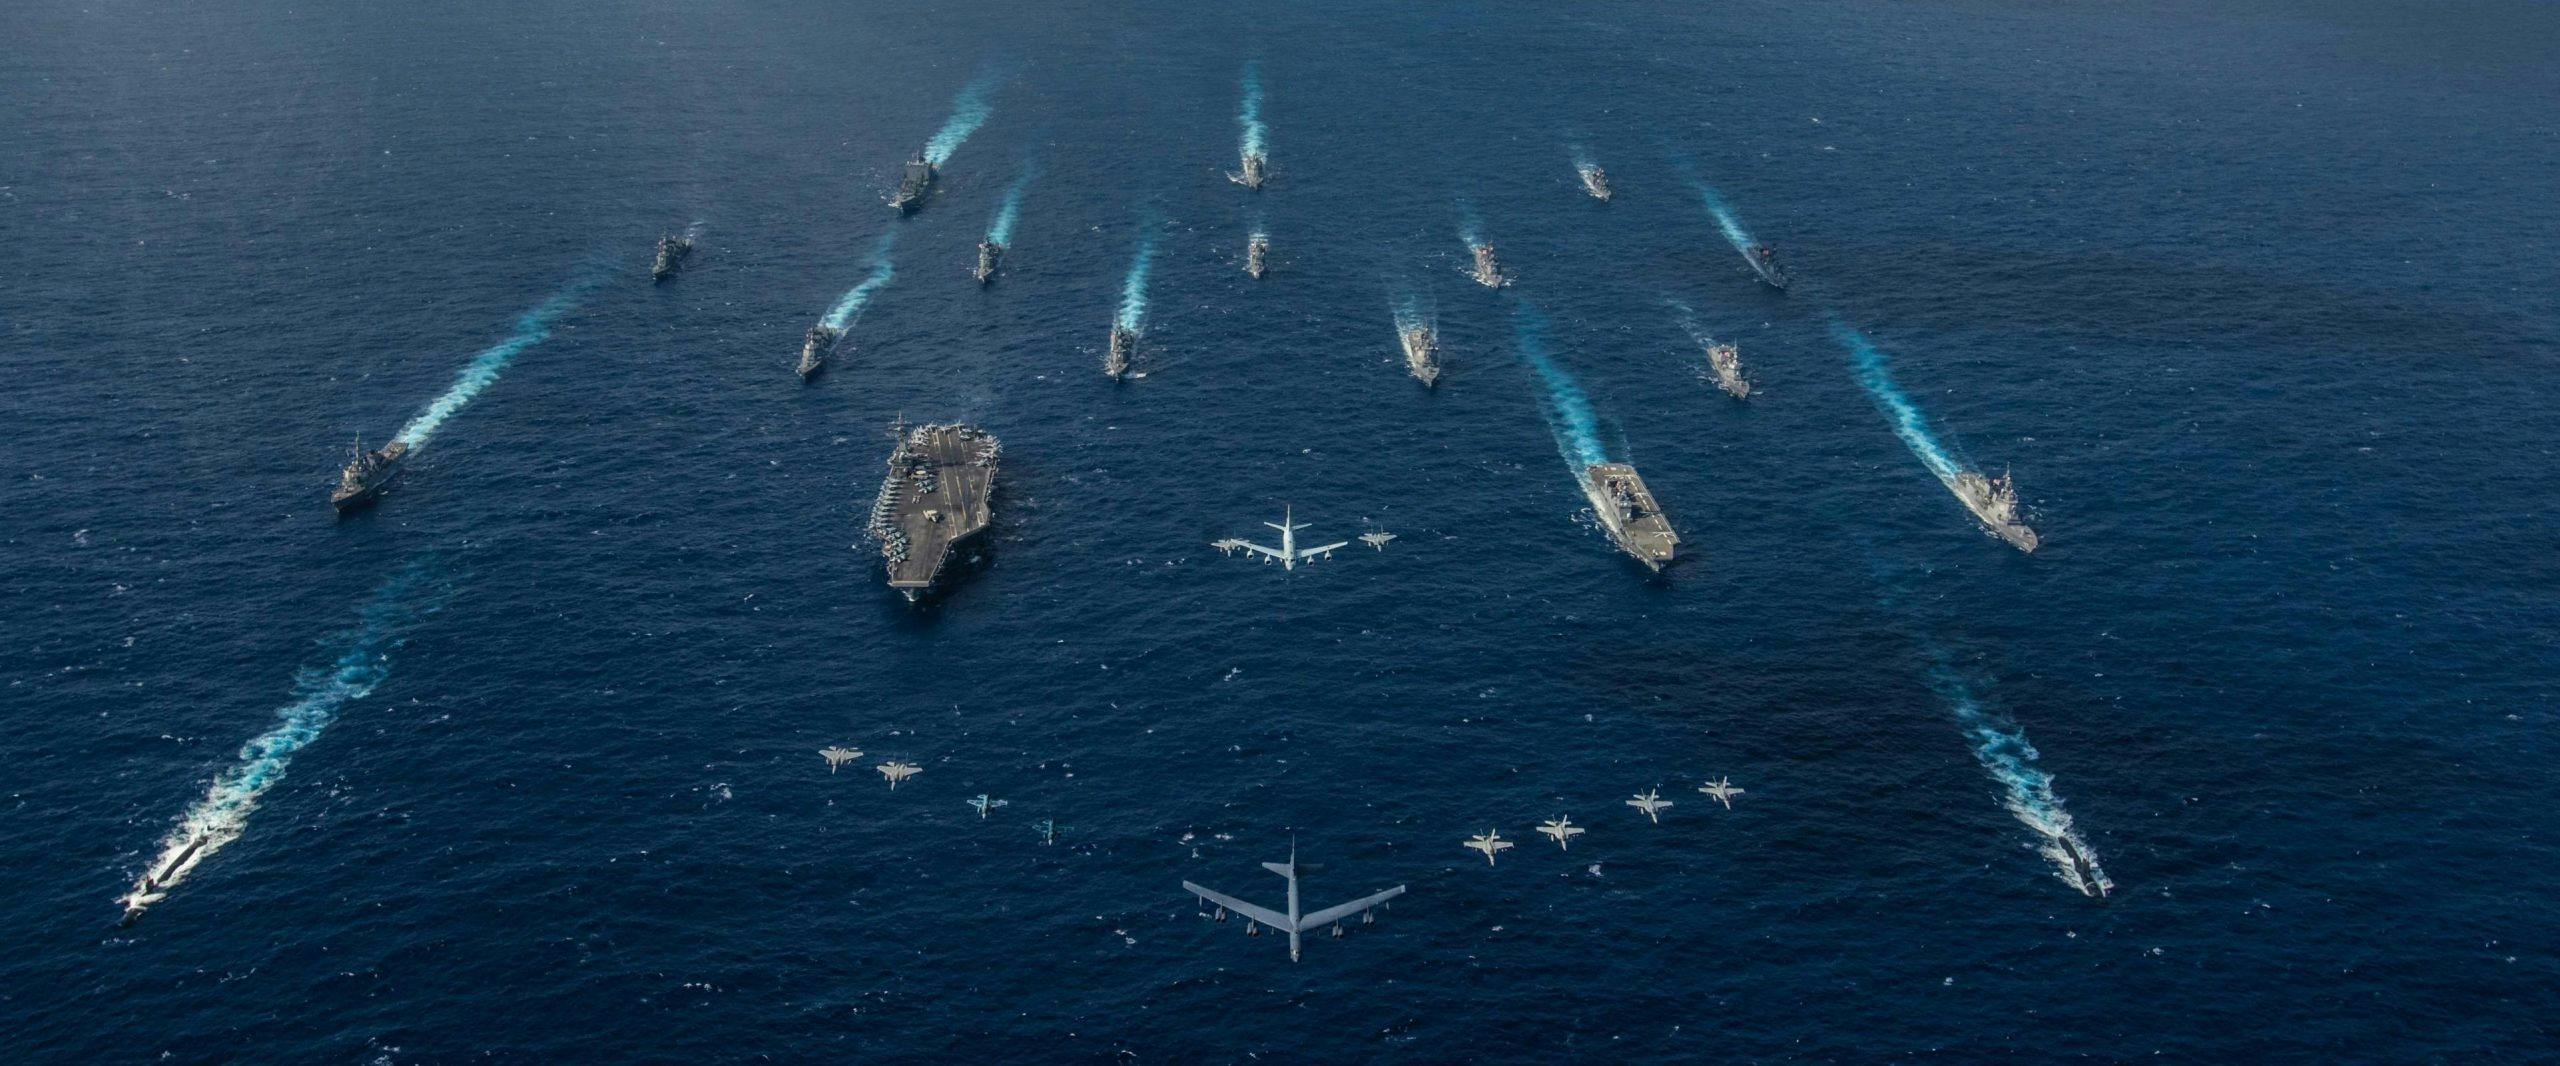 Ariel view of navy ships in the ocean and aircraft flying above them.